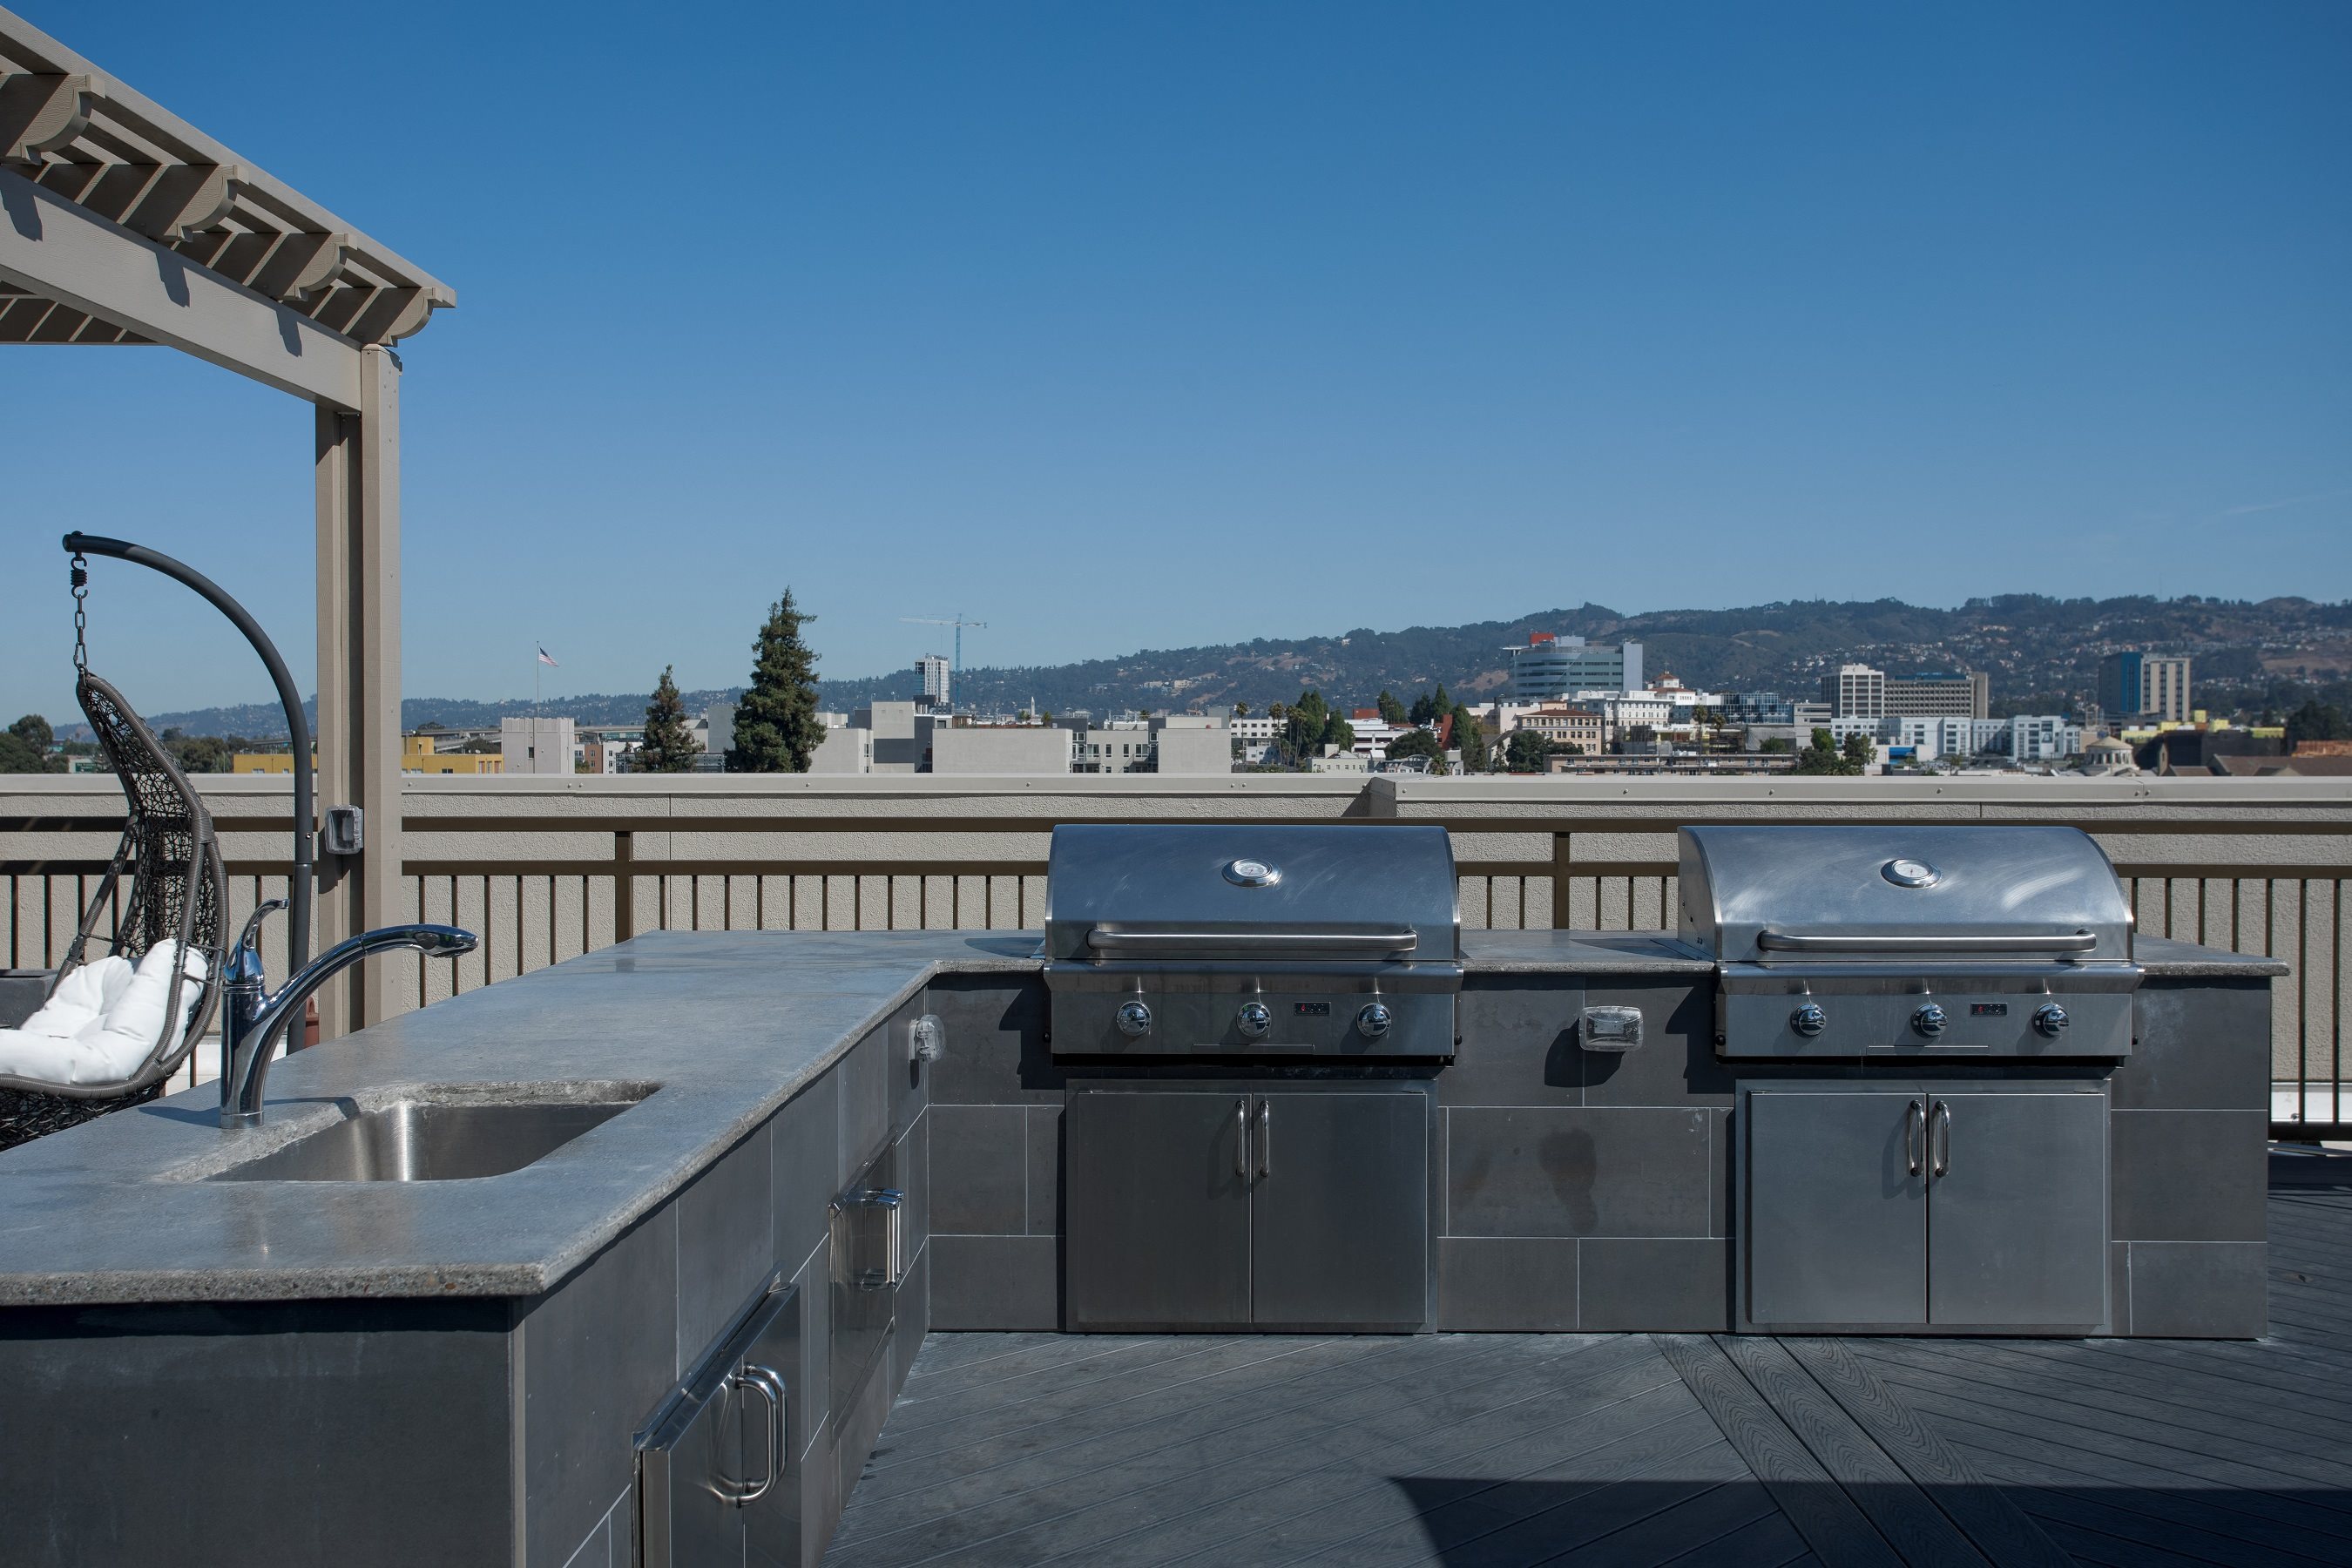 Oakland CA Apartments for Rent - Expansive Rooftop with a Great View of the City Featuring Various Shaded Lounging Areas and Outdoor Grill